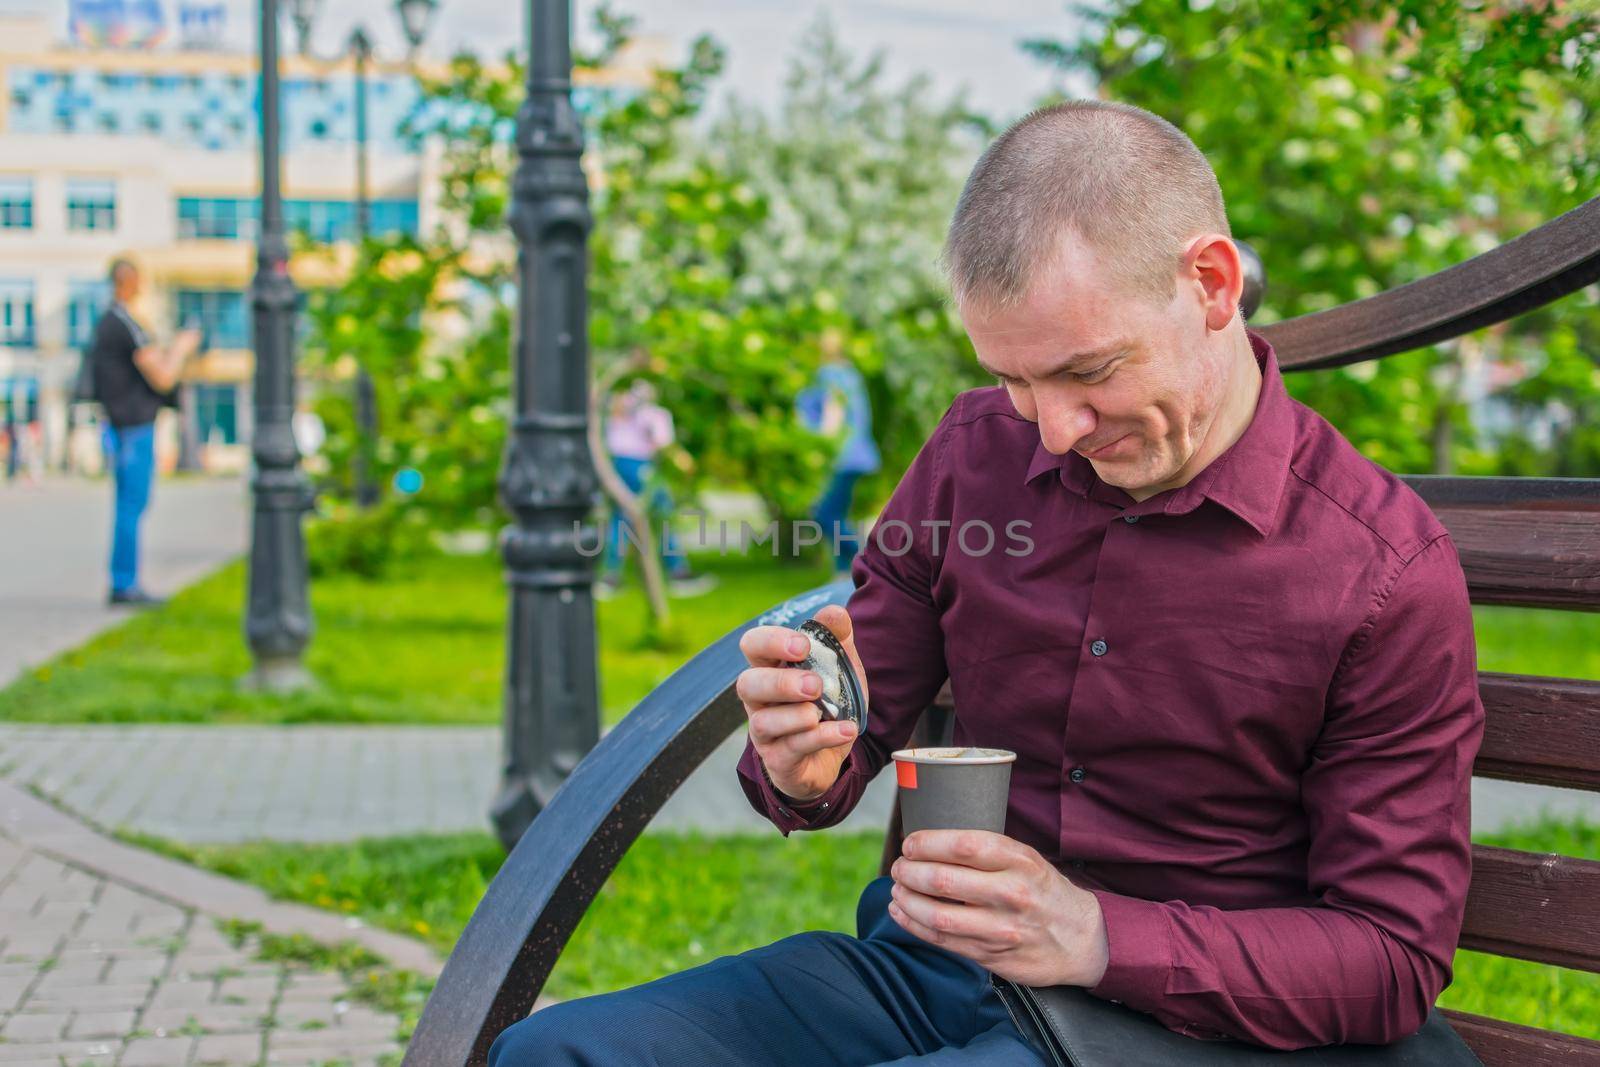 Joyful office worker opening a delicious and hot drink during lunch while sitting on a park bench